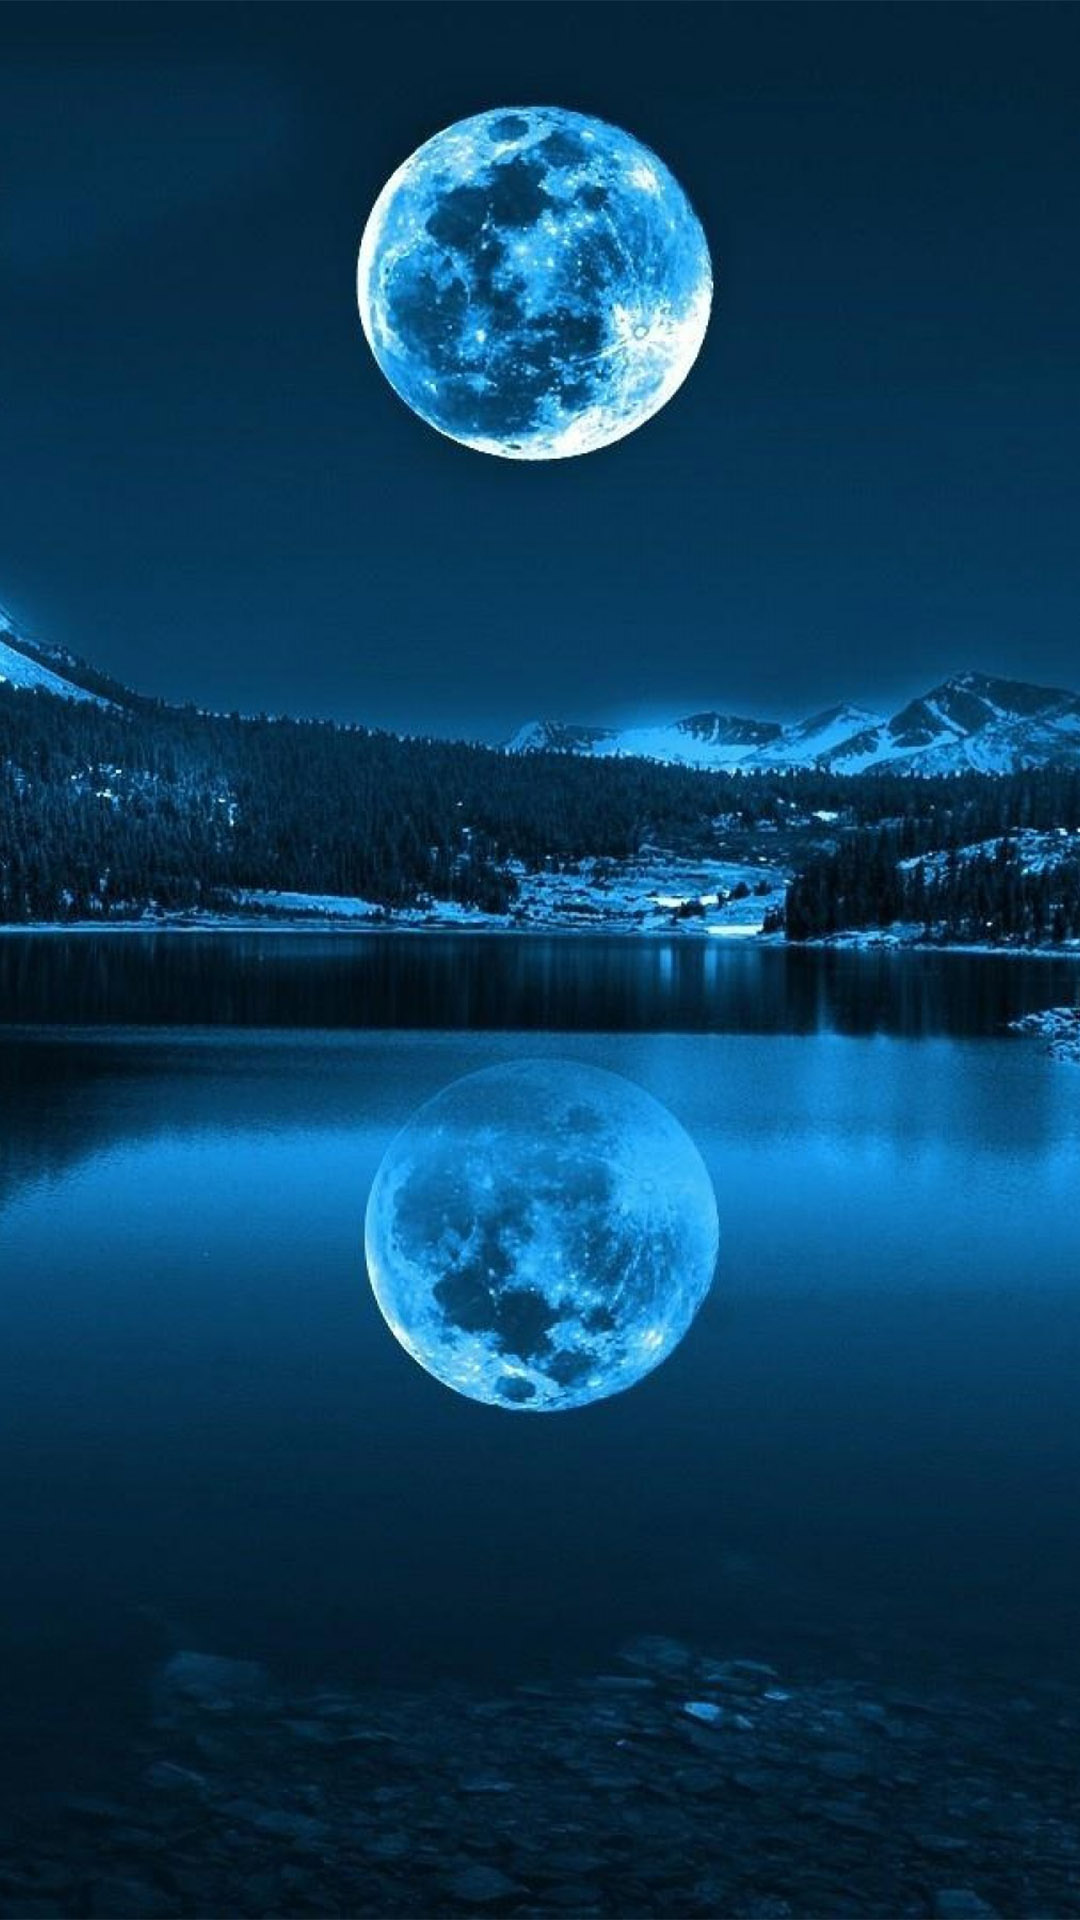 Giant Moon Rise Smartphone Wallpapers HD GetPhotos